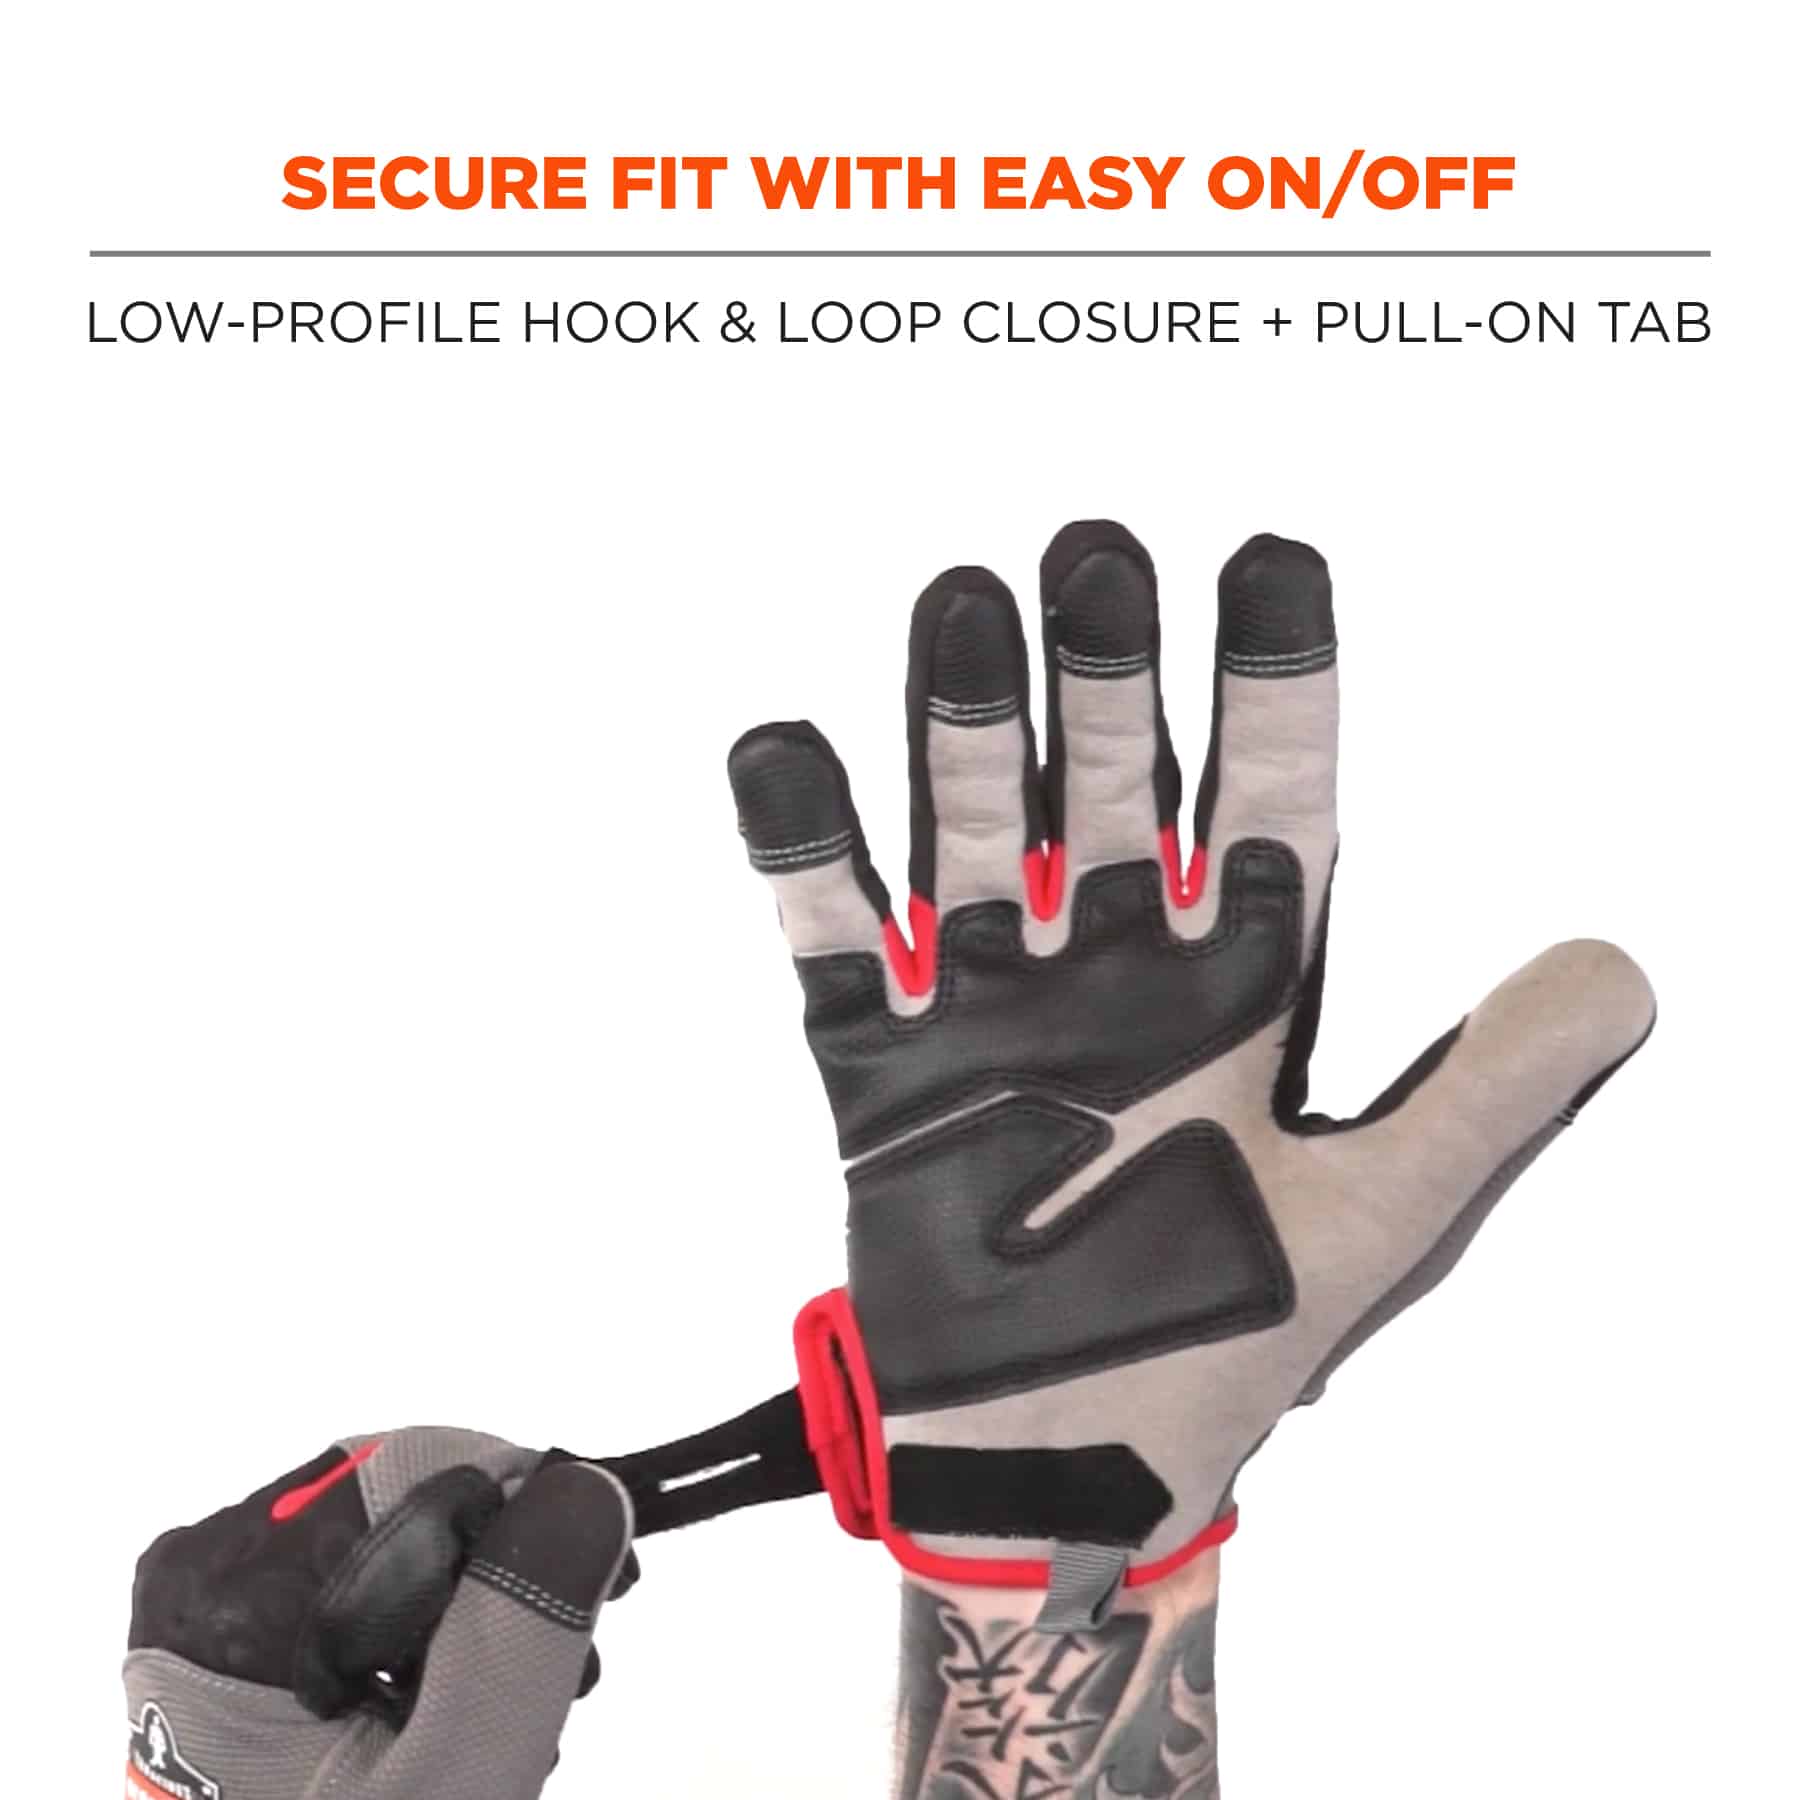 https://www.ergodyne.com/sites/default/files/product-images/17123-710cr-heavy-duty-cut-resistance-gloves-secure-fit-with-easy-on-off.jpg